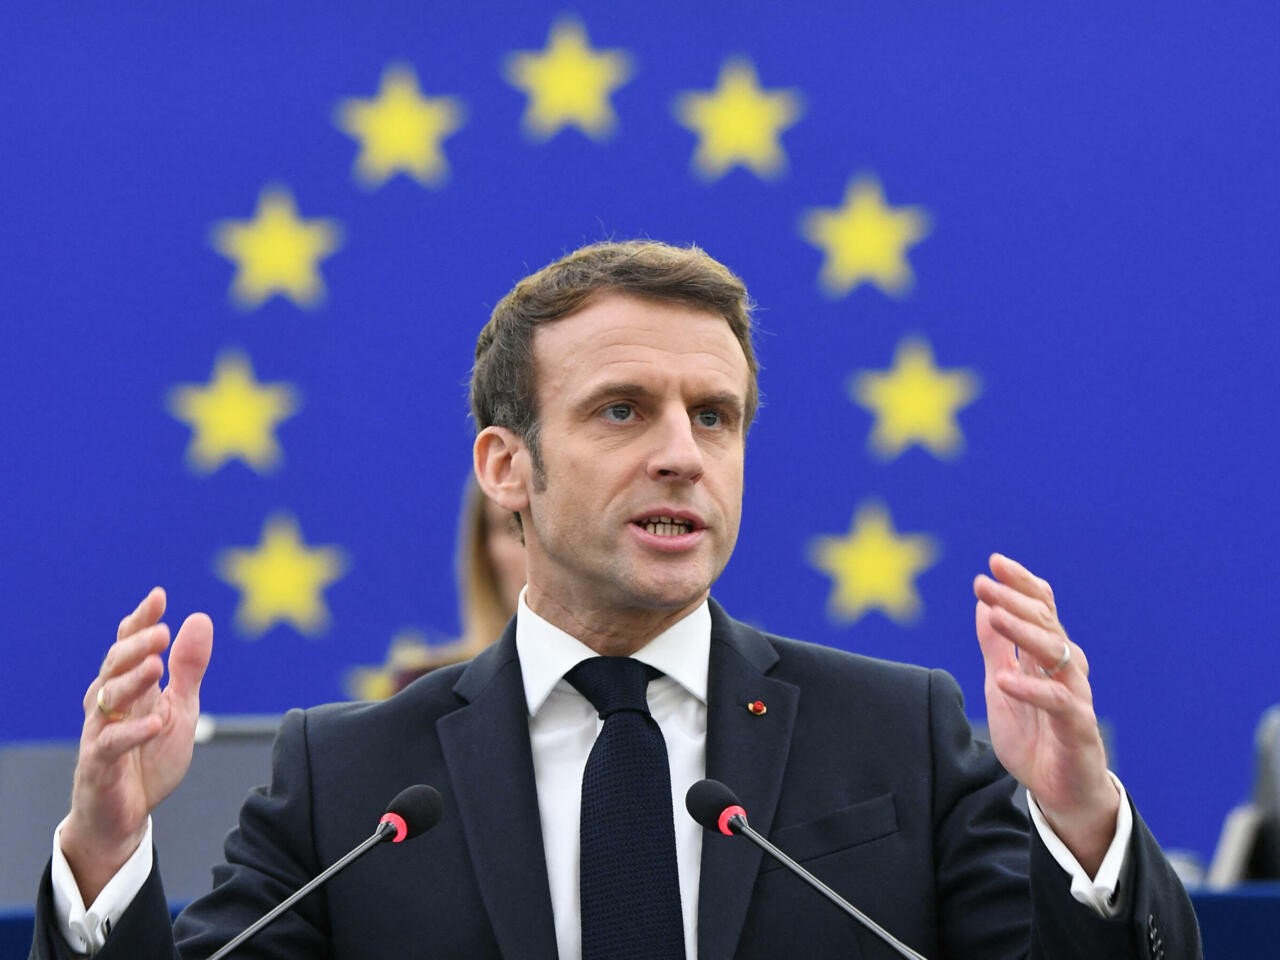 Macron Warns Europe: Russia’s Aggression Must Be Met With Resolve